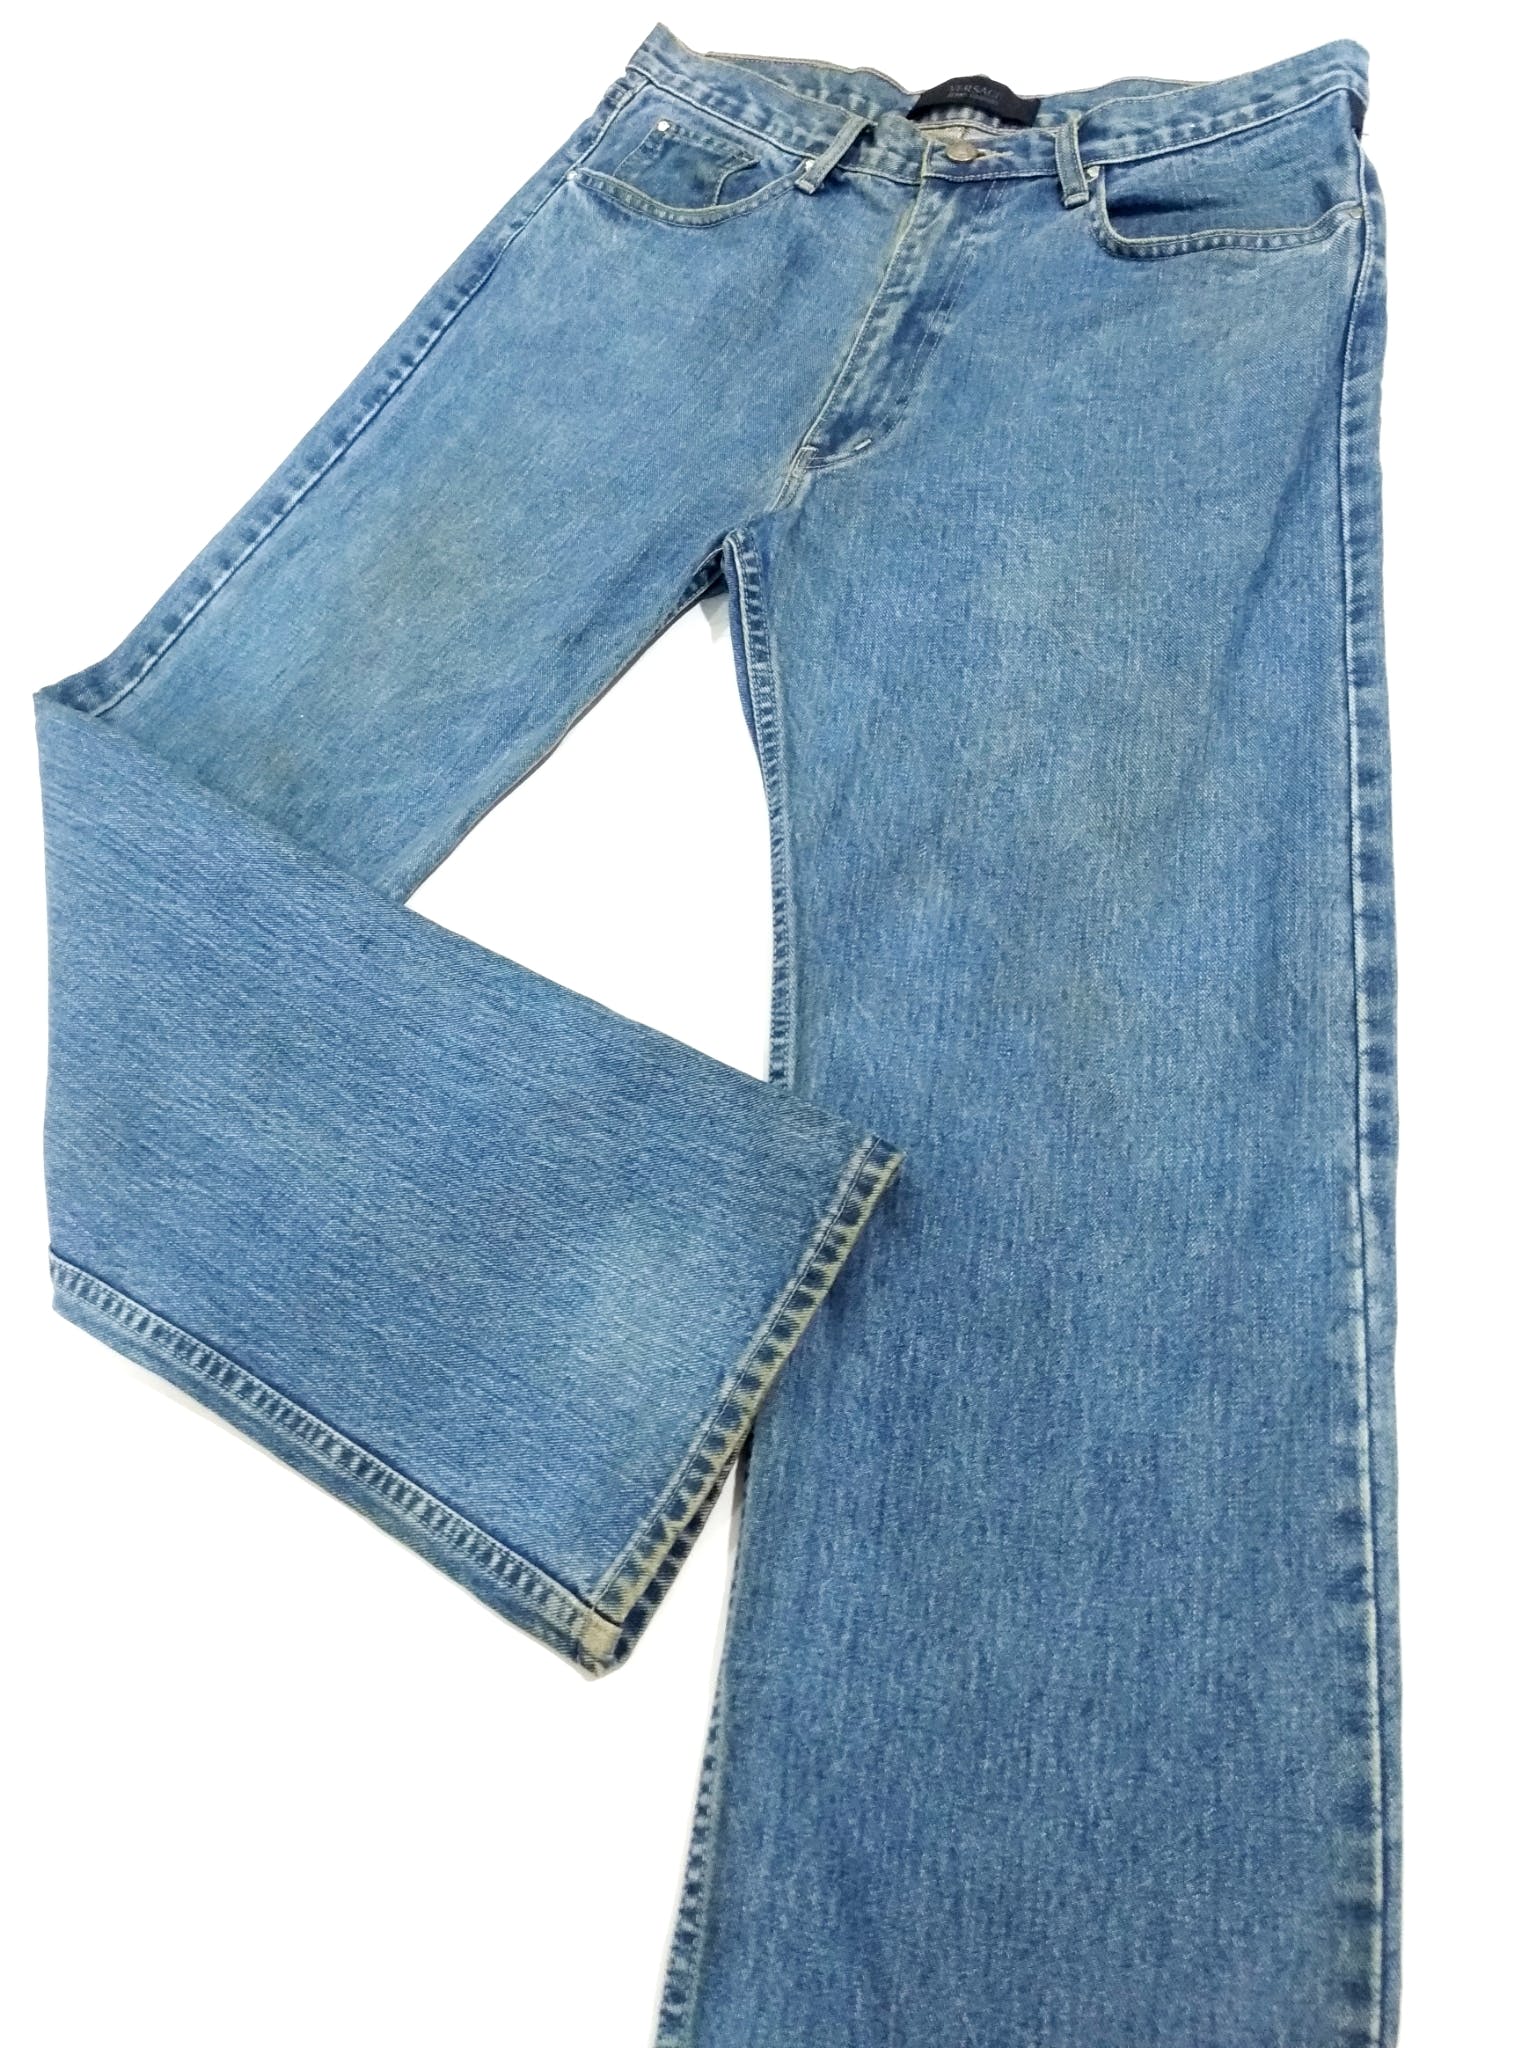 RARE!VTG 90s VERSACE JEANS COUTURE MADE IN ITALY BLUE DENIM - 4